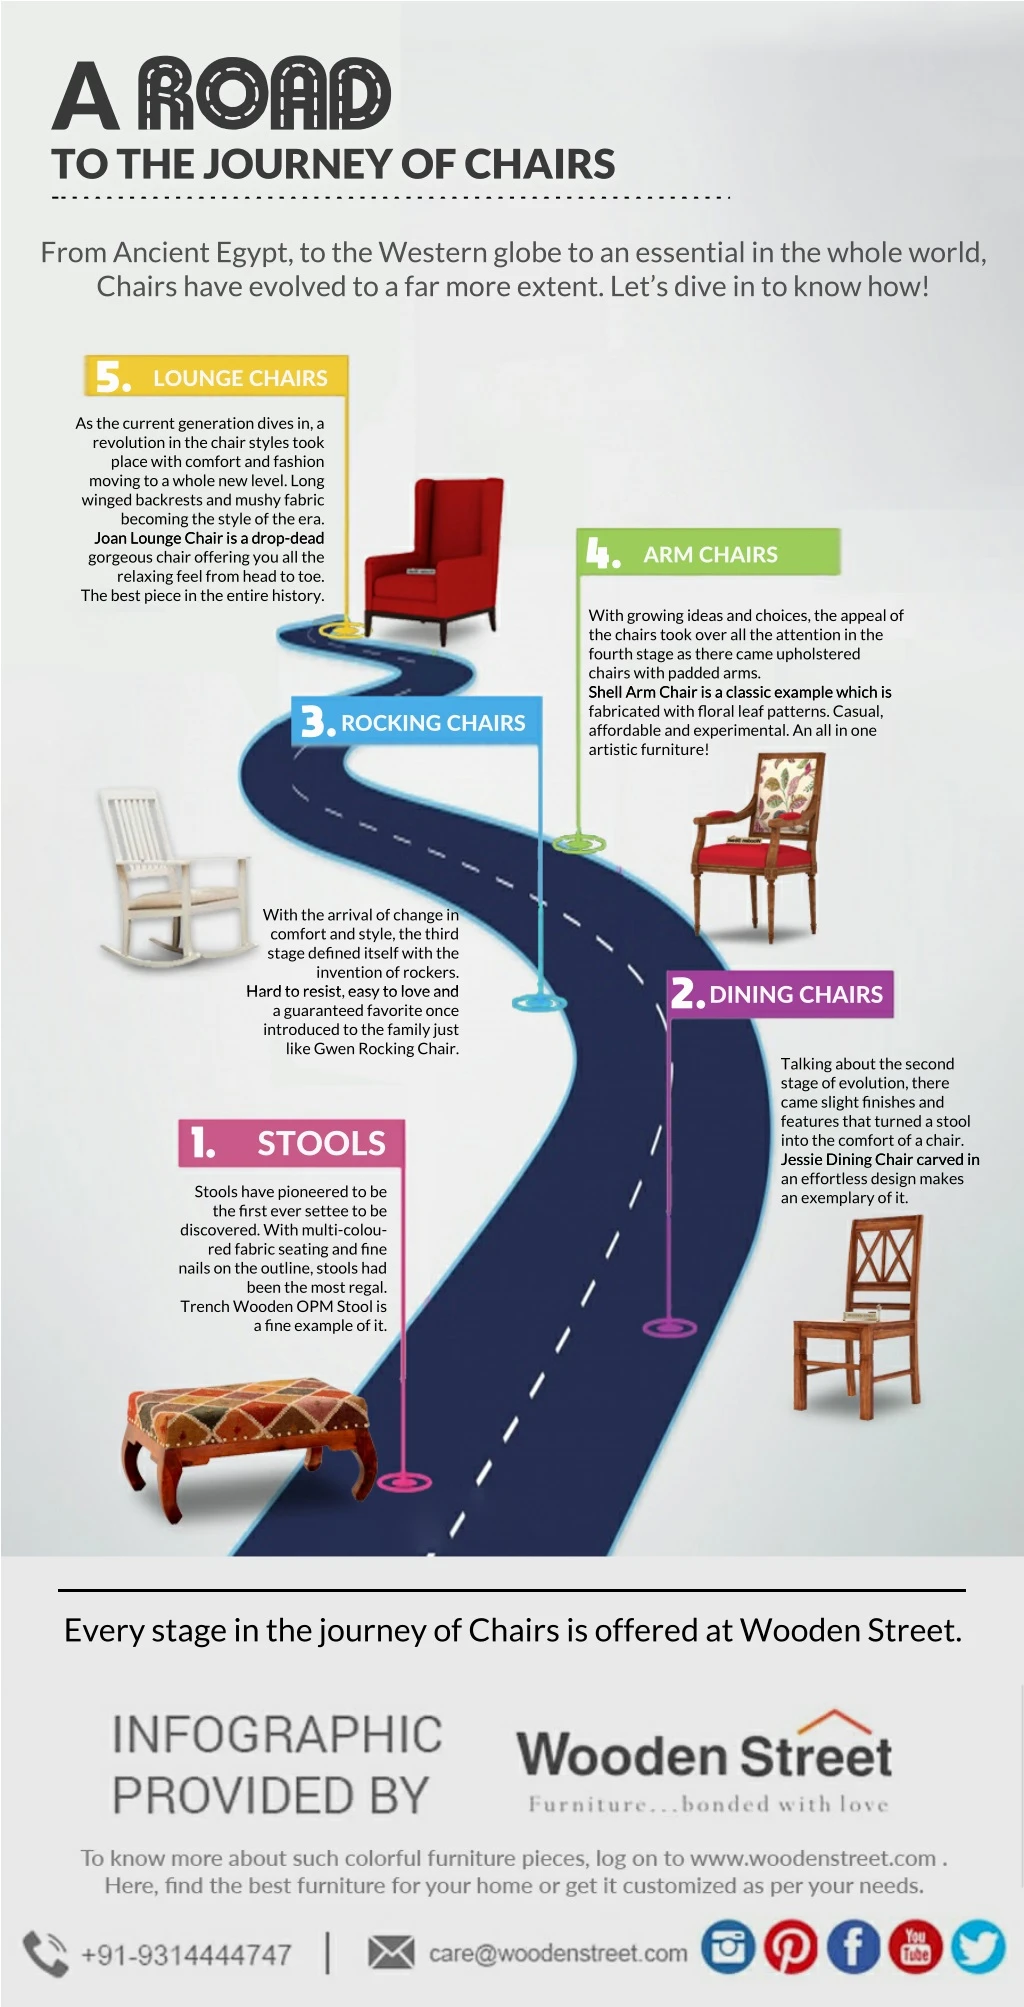 a road to the journey of chairs